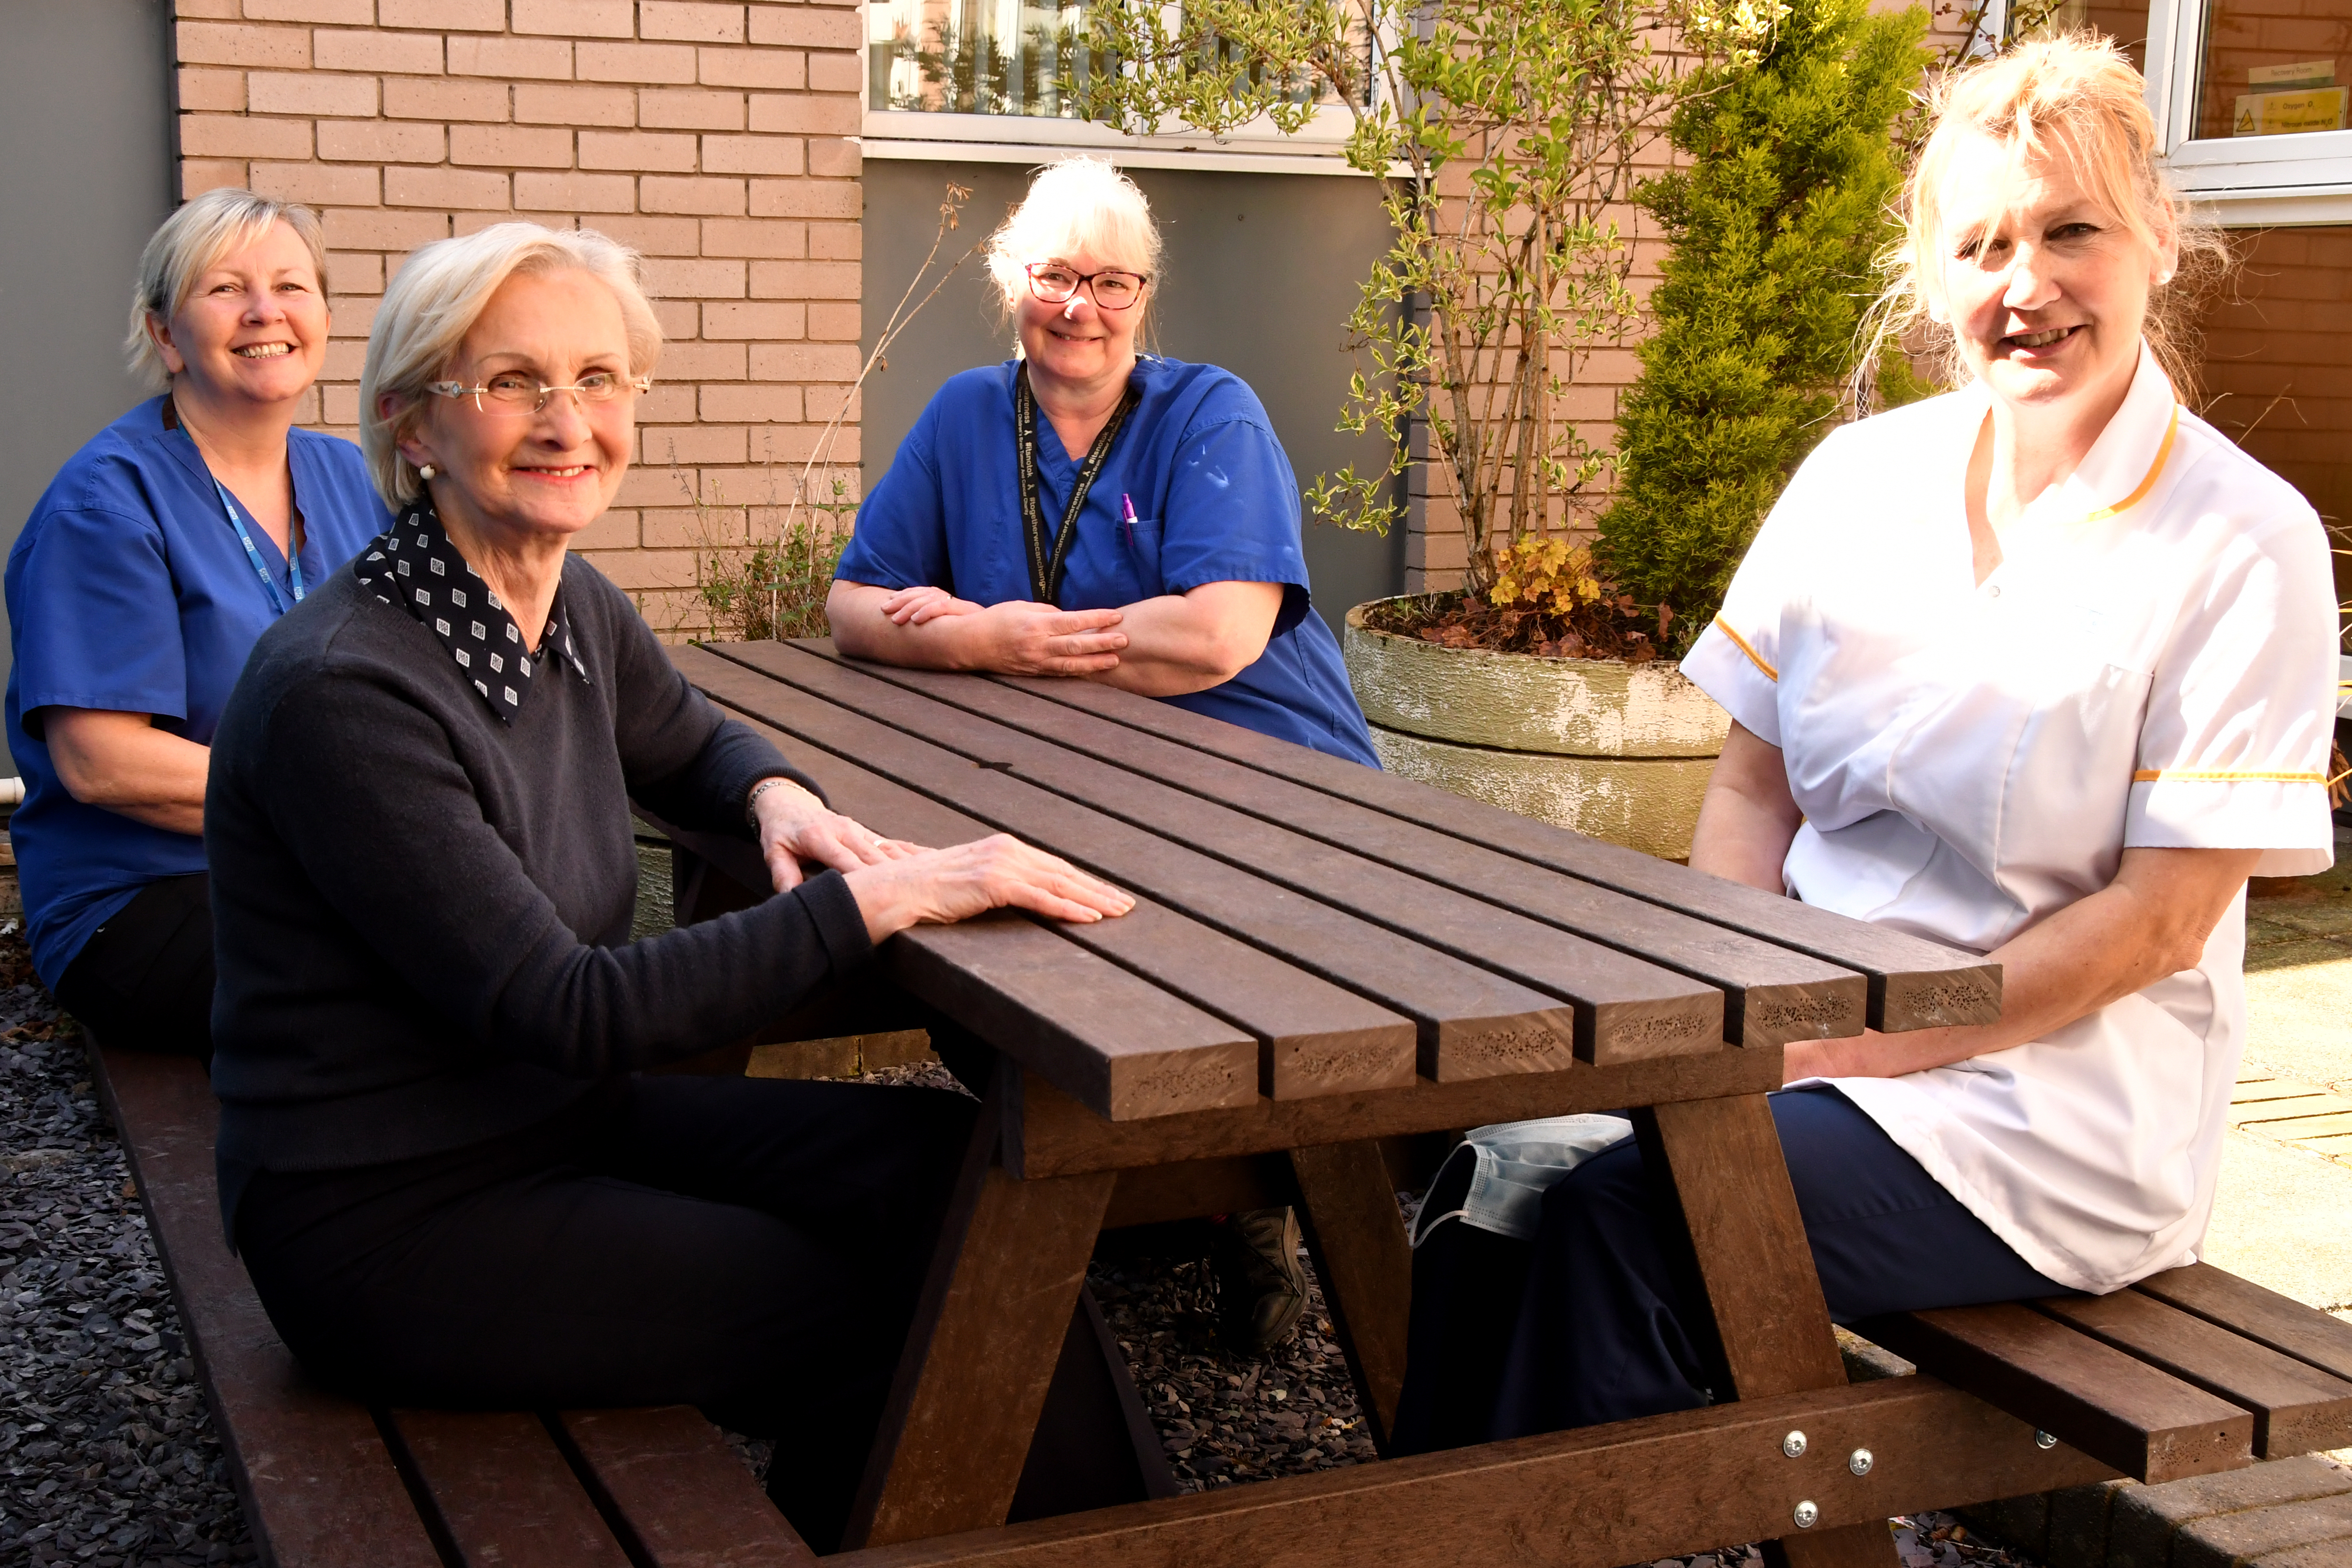 Dental Nurse Julie Atkin, Receptionist Hilary Freedman, Dental Nurse Anne Hughes and Senior dental Nurse Cecily Pike are pictured enjoying the new outdoor furniture at the Maxillofacial Department at Royal Lancaster Infirmary.